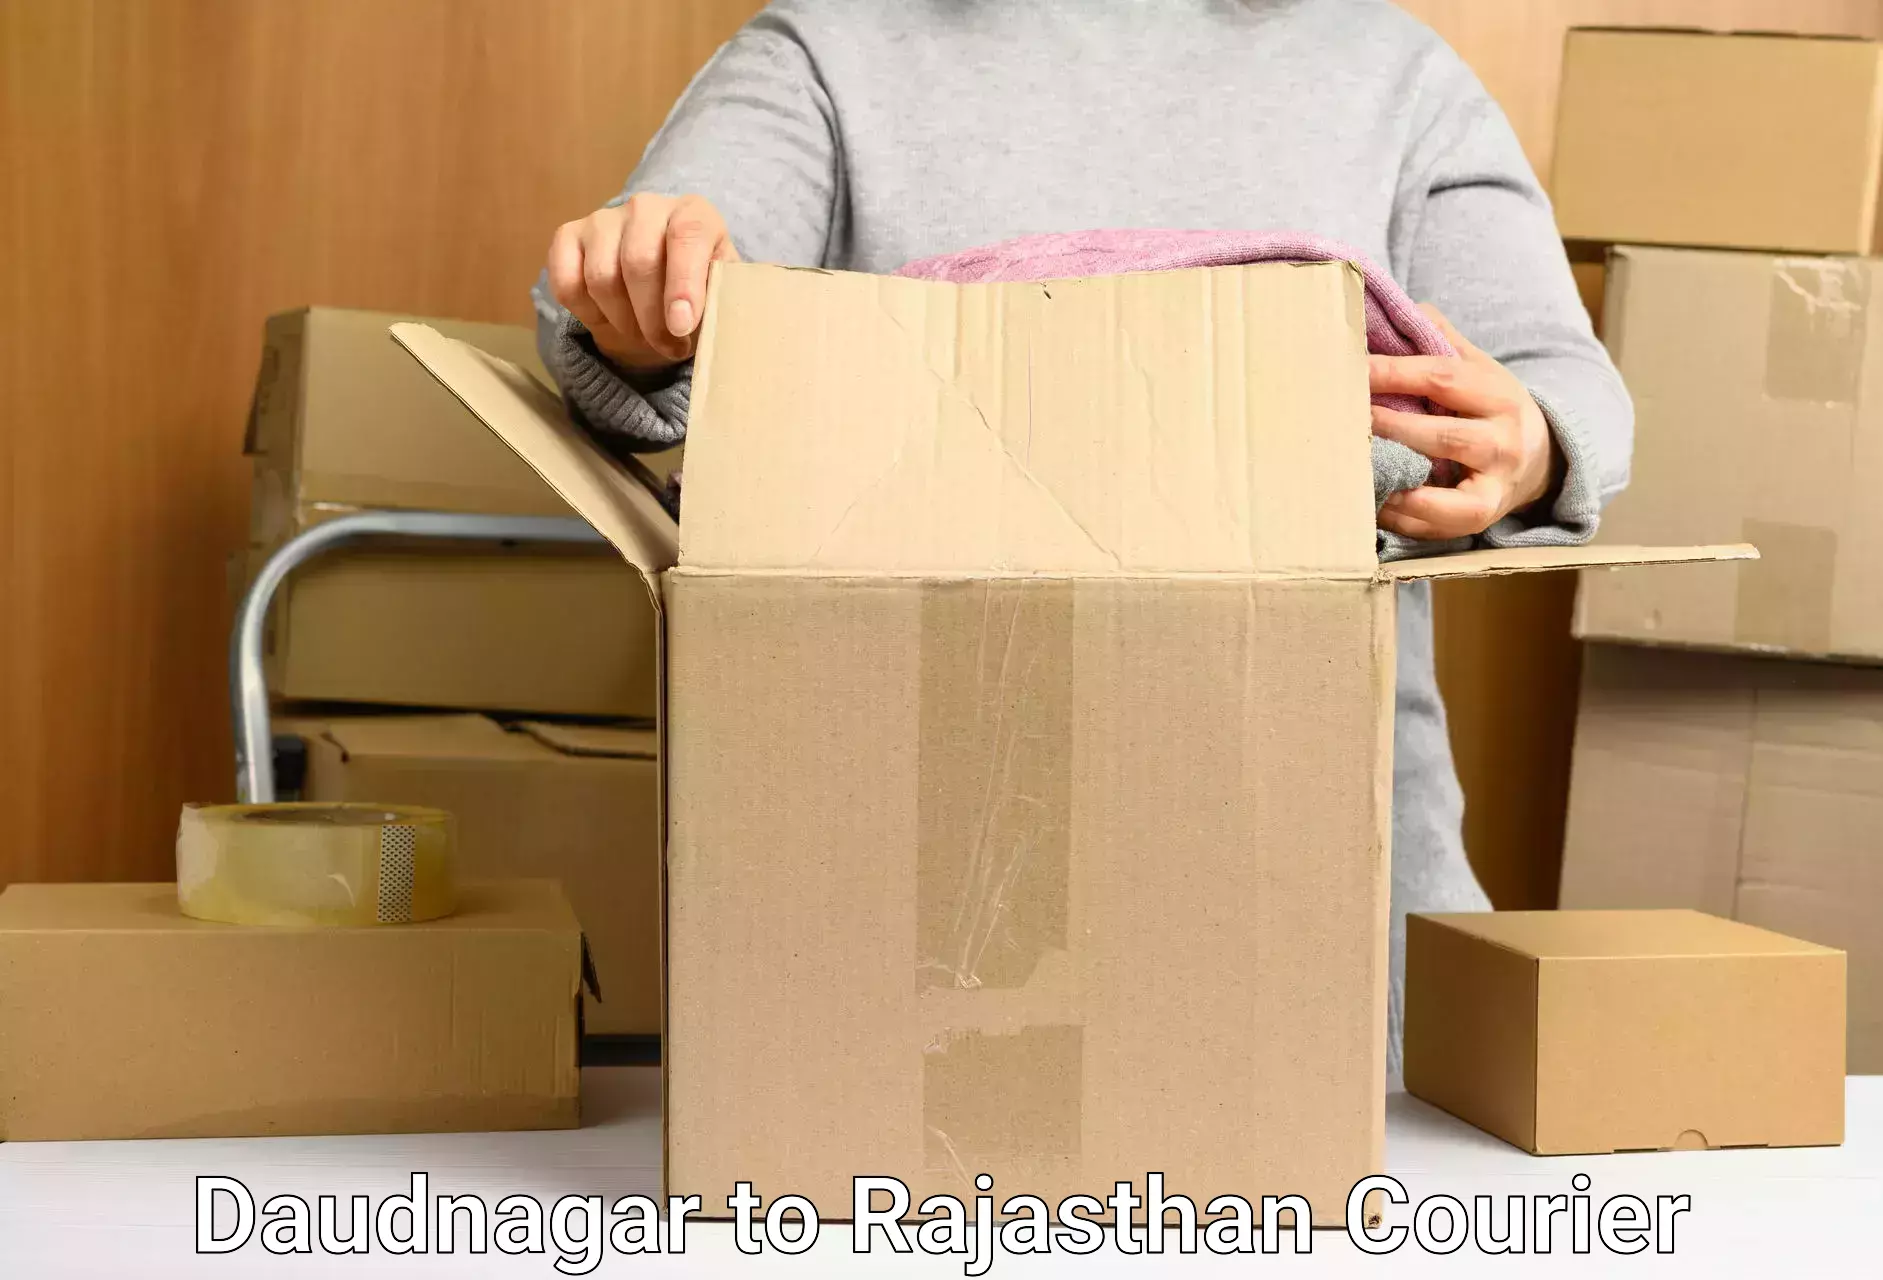 Specialized courier services in Daudnagar to Rajasthan